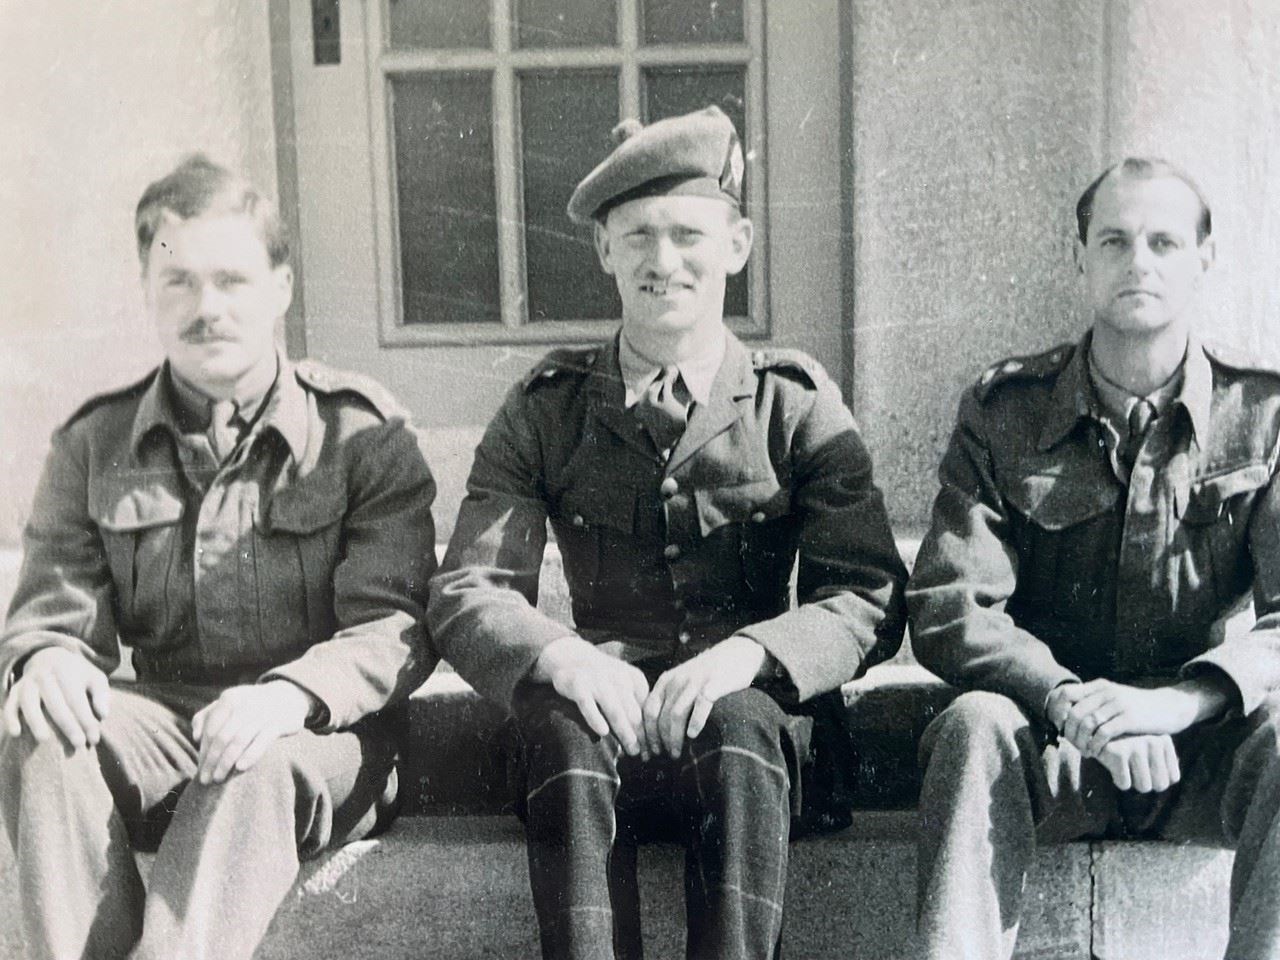 Major John Errington (left) during his time as a prisoner of war in 1942 (The Royal Scots/PA)